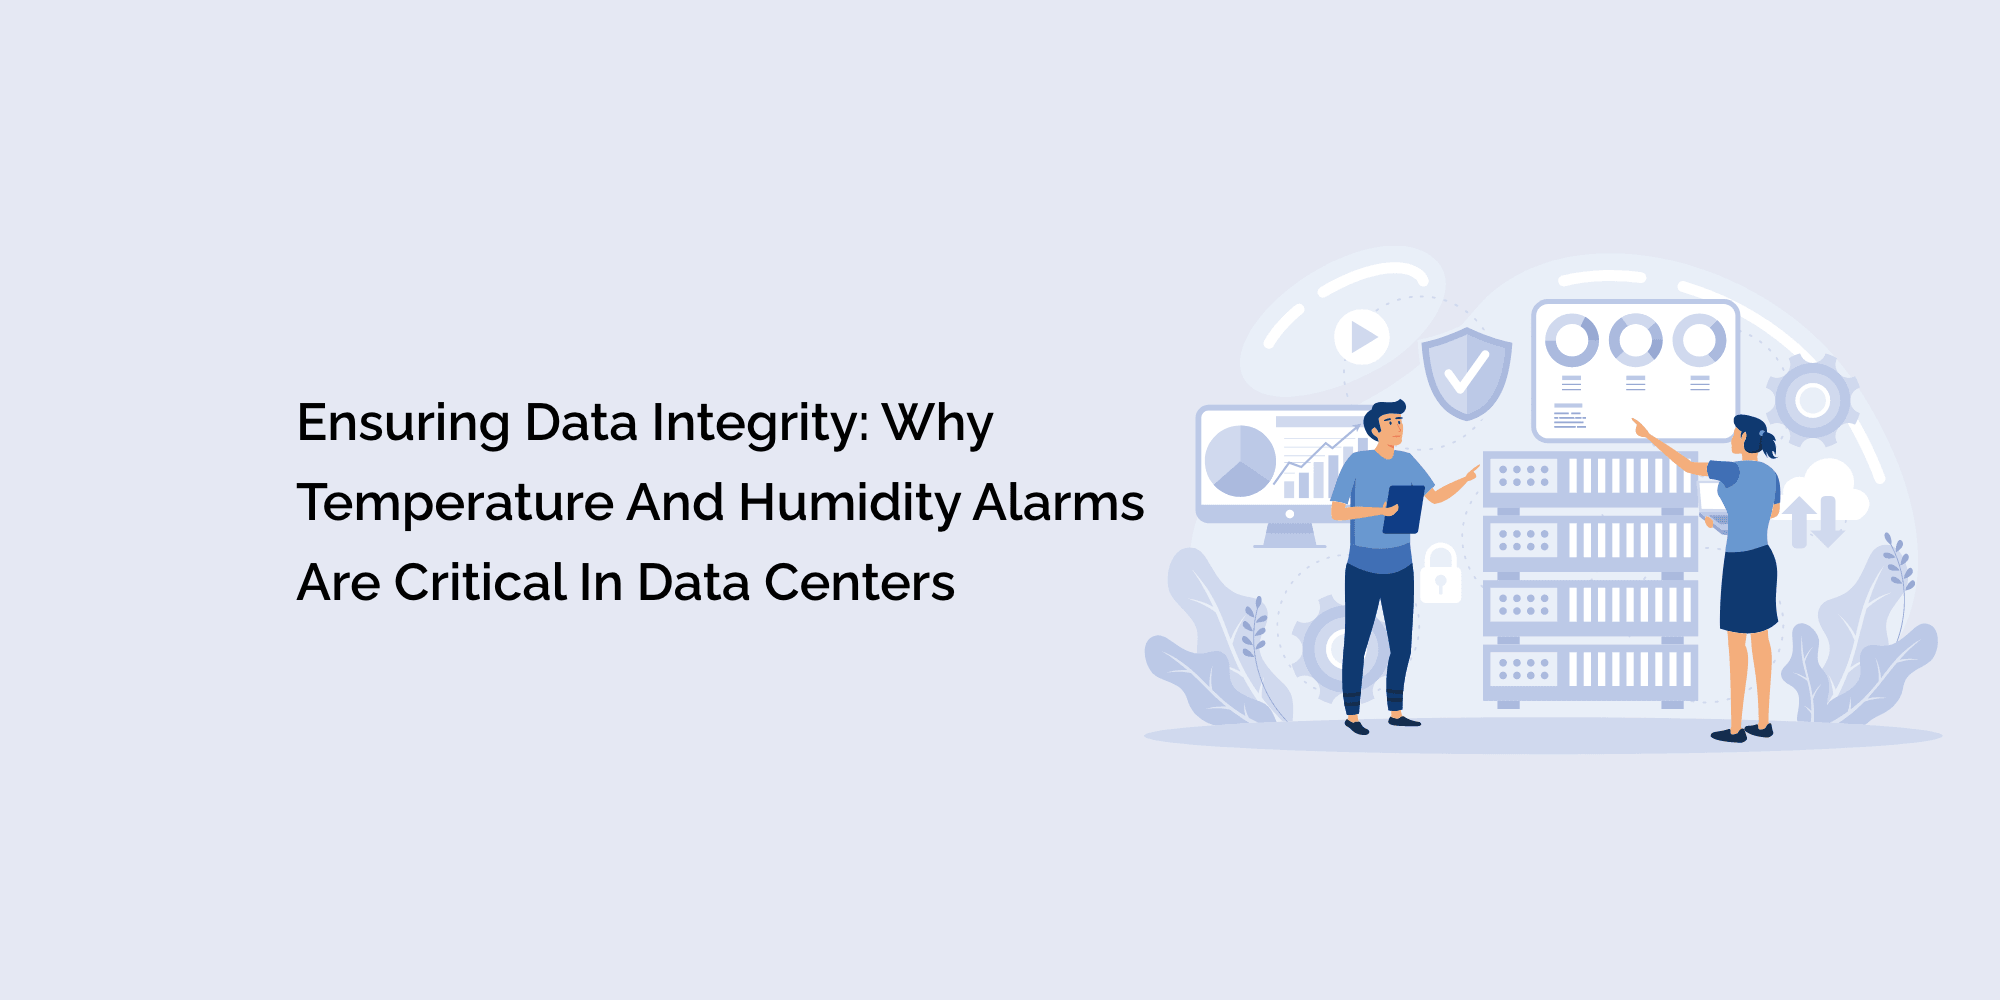 Ensuring Data Integrity: Why Temperature and Humidity Alarms Are Critical in Data Centers